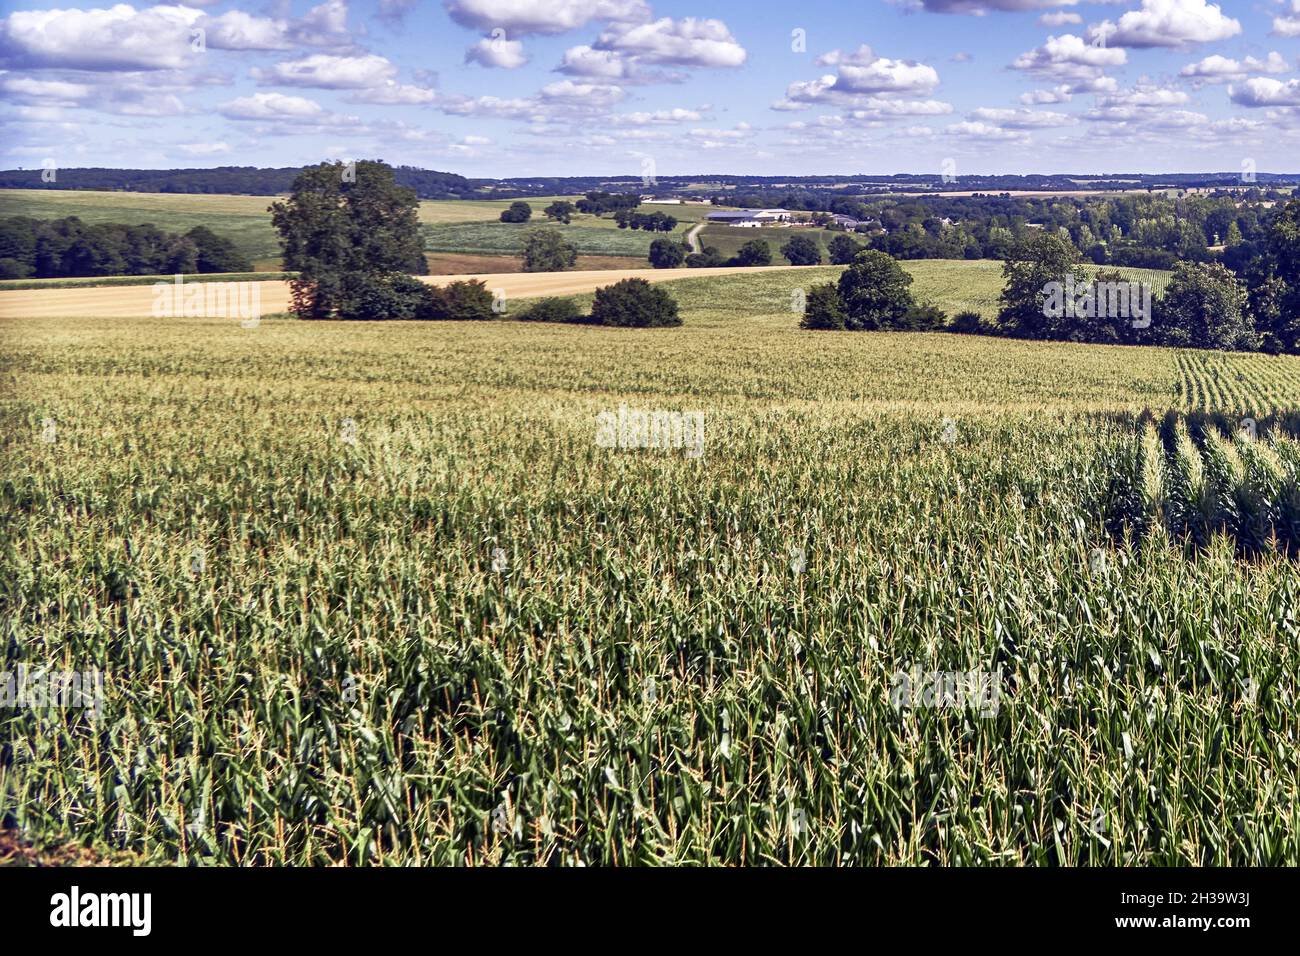 Bazouges la Perouse, France. Ille-et-Vilaine department, Britain.  Green landscape of corn fields and groves with forests on the horizon. Stock Photo